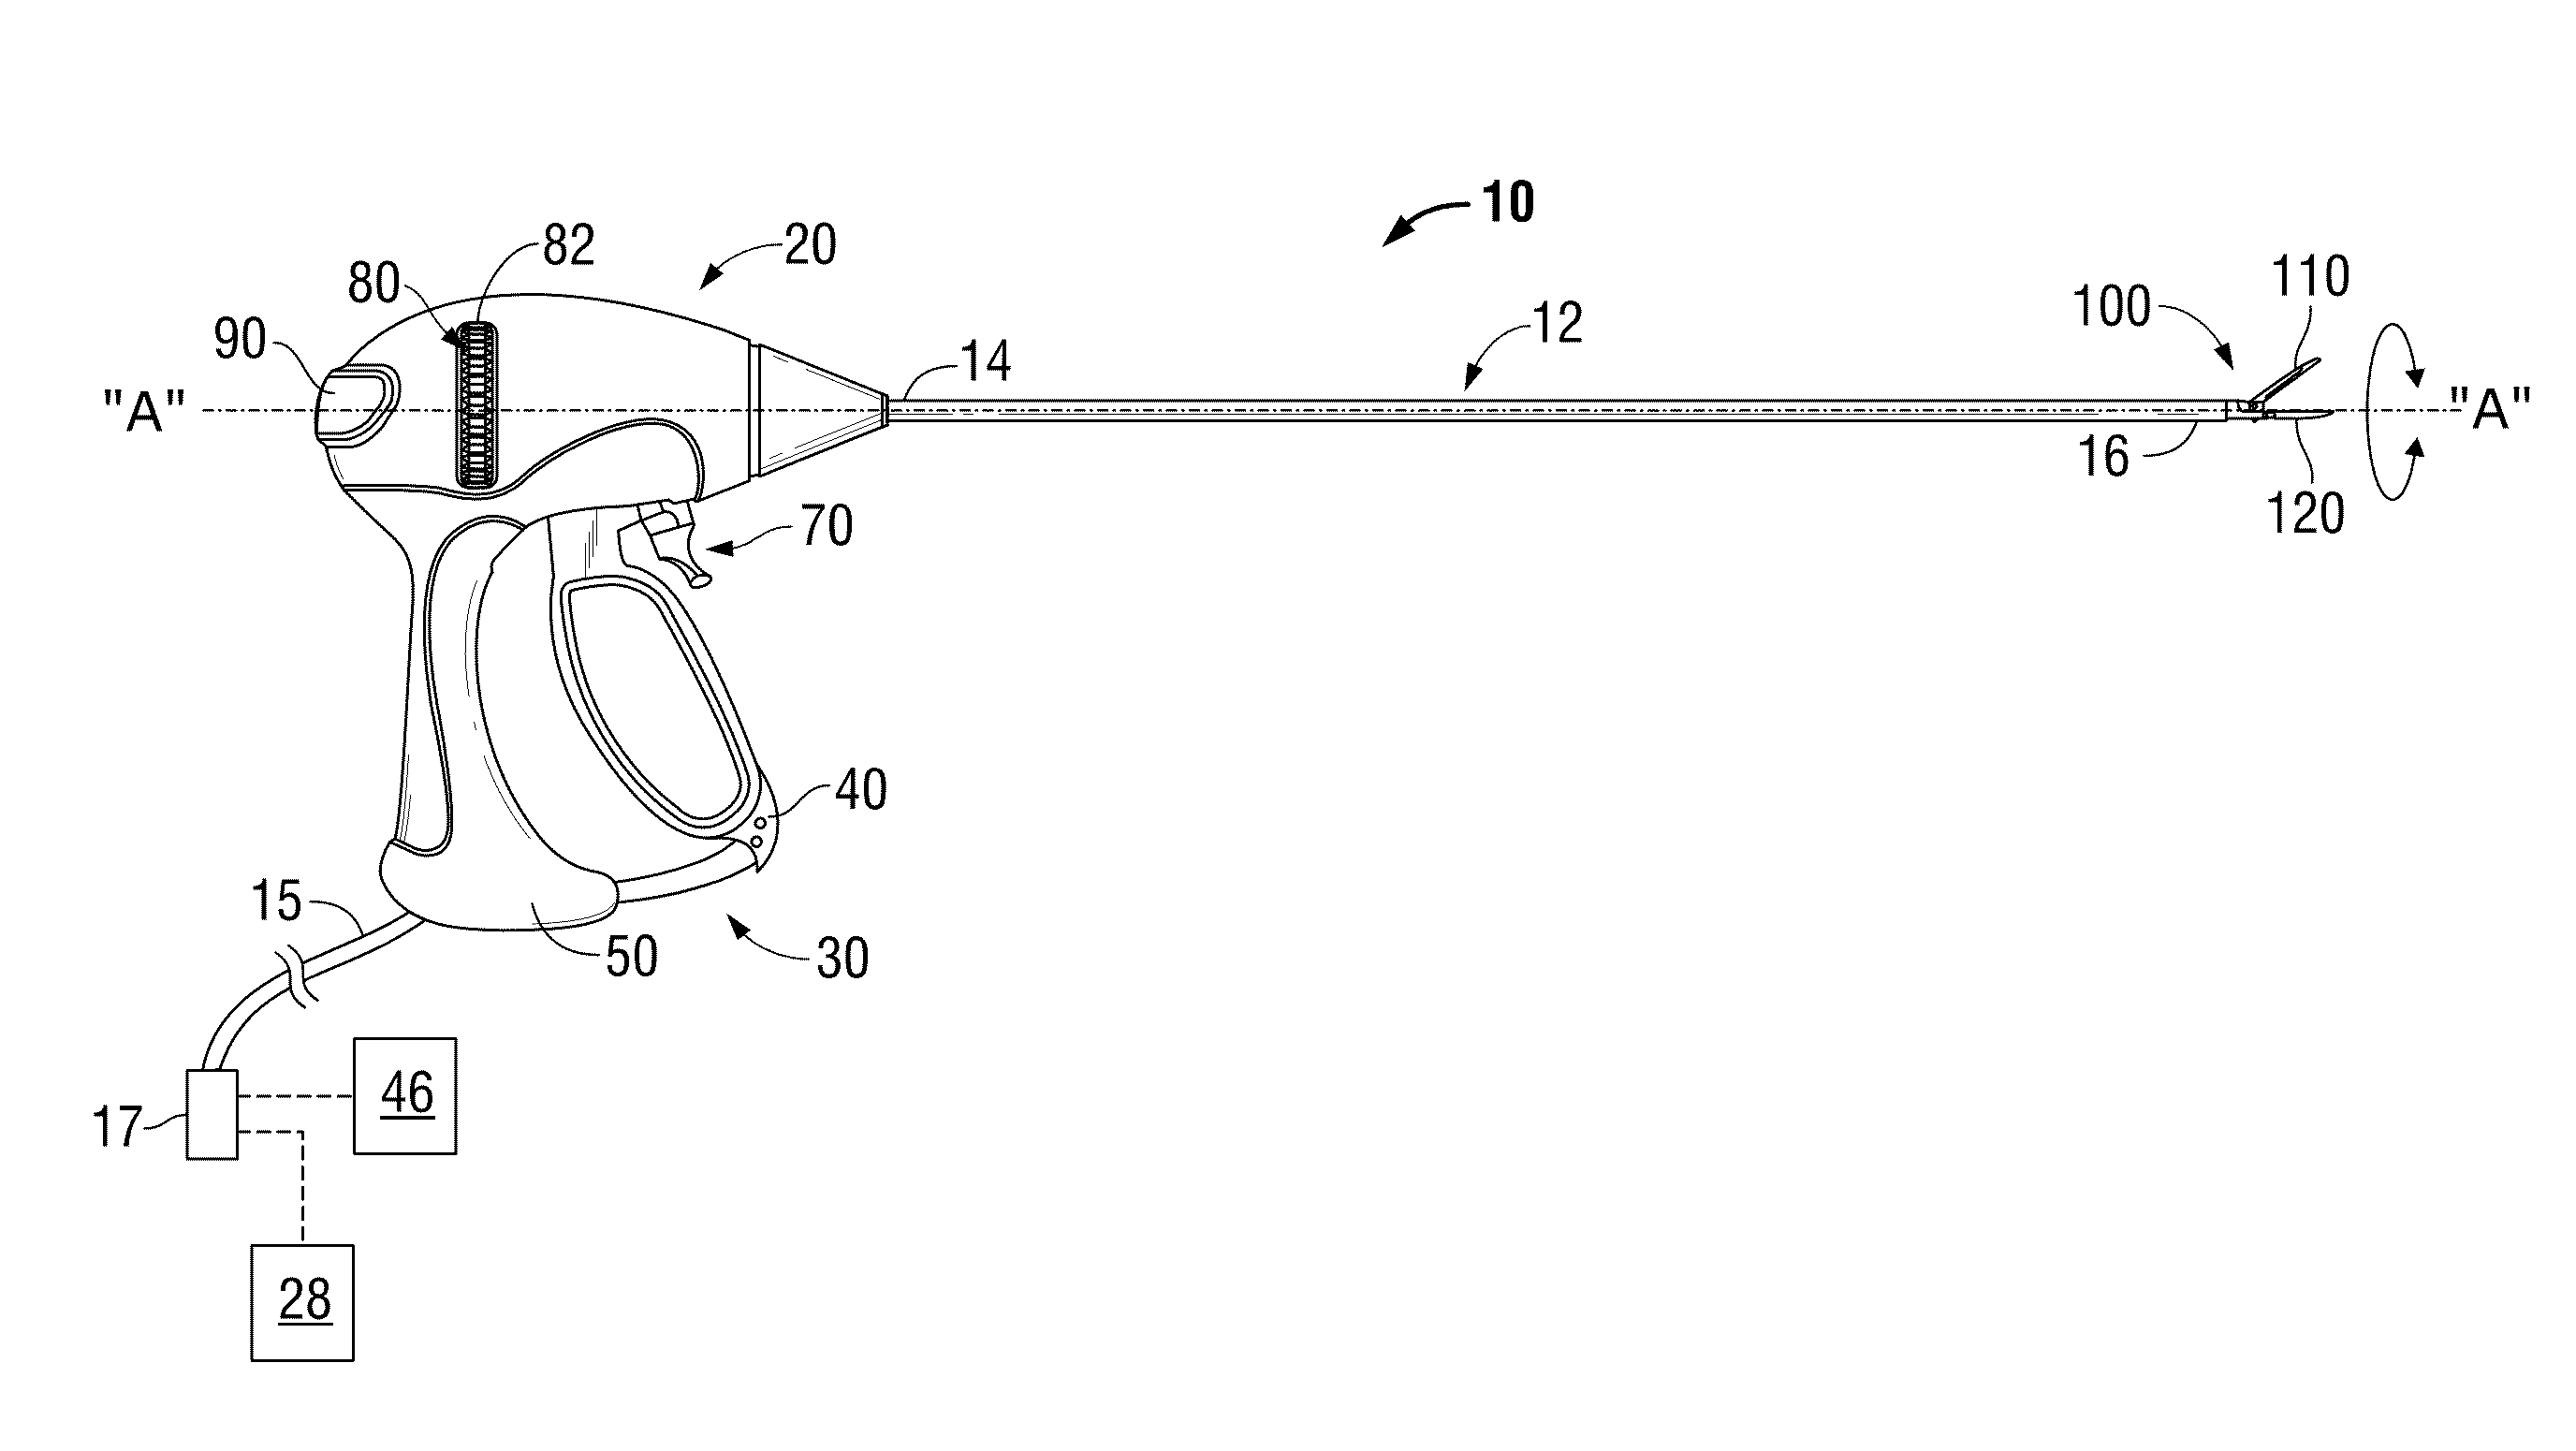 Temperature-sensing electrically-conductive tissue-contacting plate configured for use in an electrosurgical jaw member, electrosurgical system including same, and methods of controlling vessel sealing using same